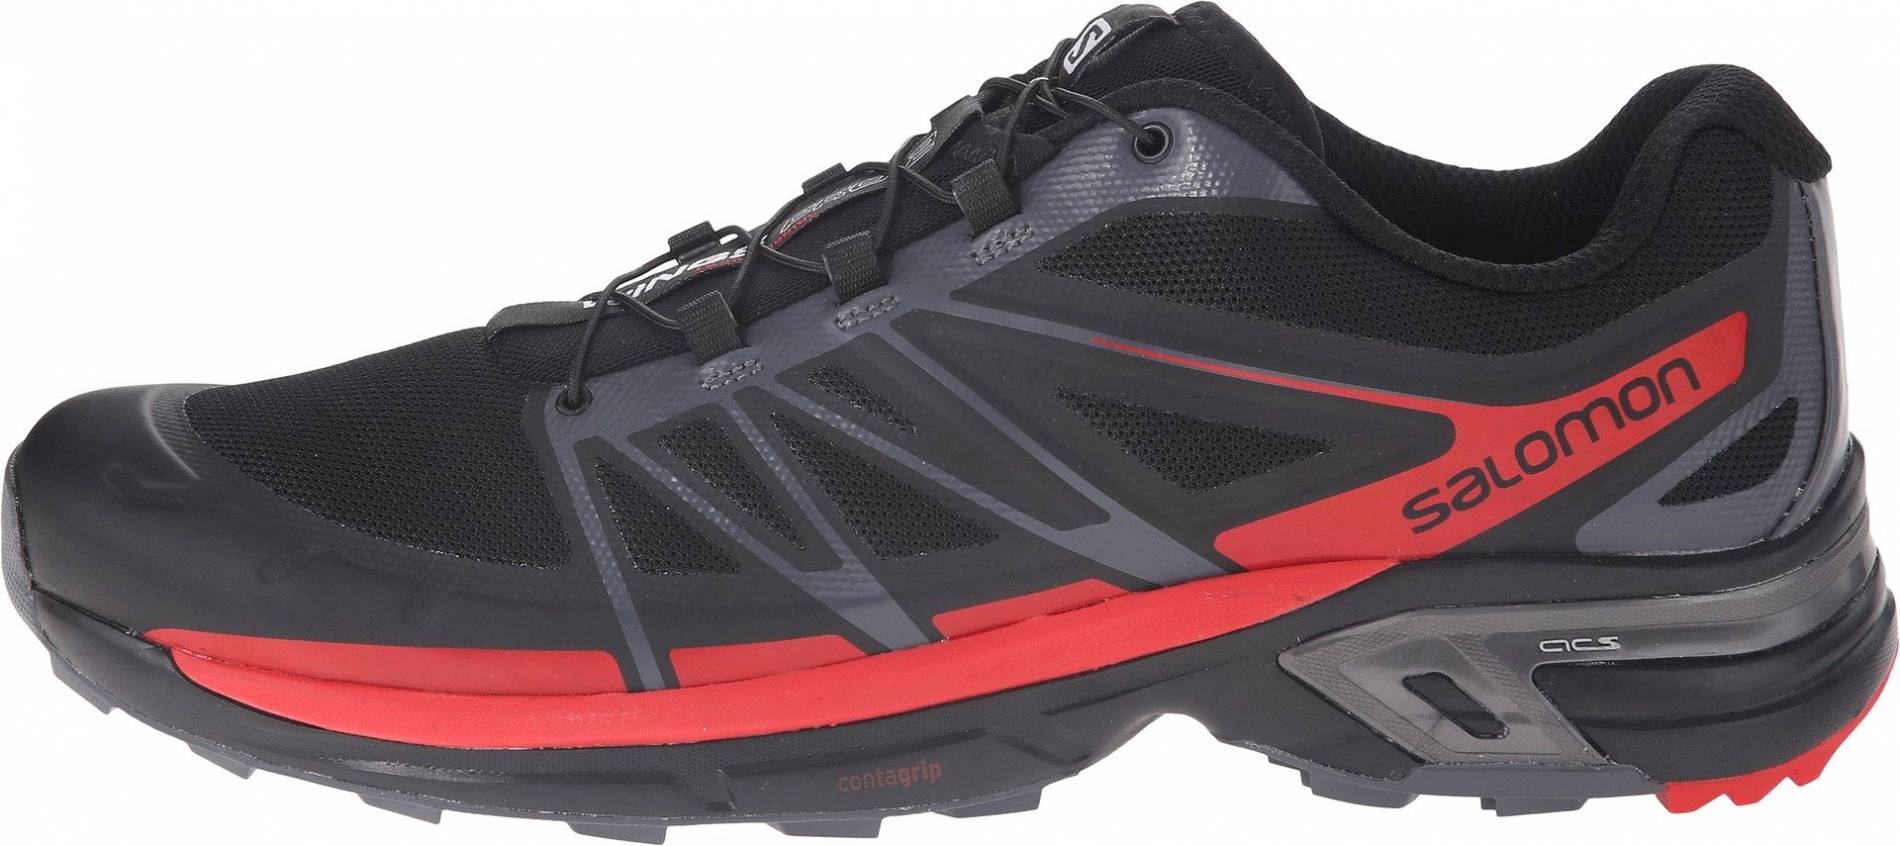 $149 + Review of Salomon Wings Pro 2 